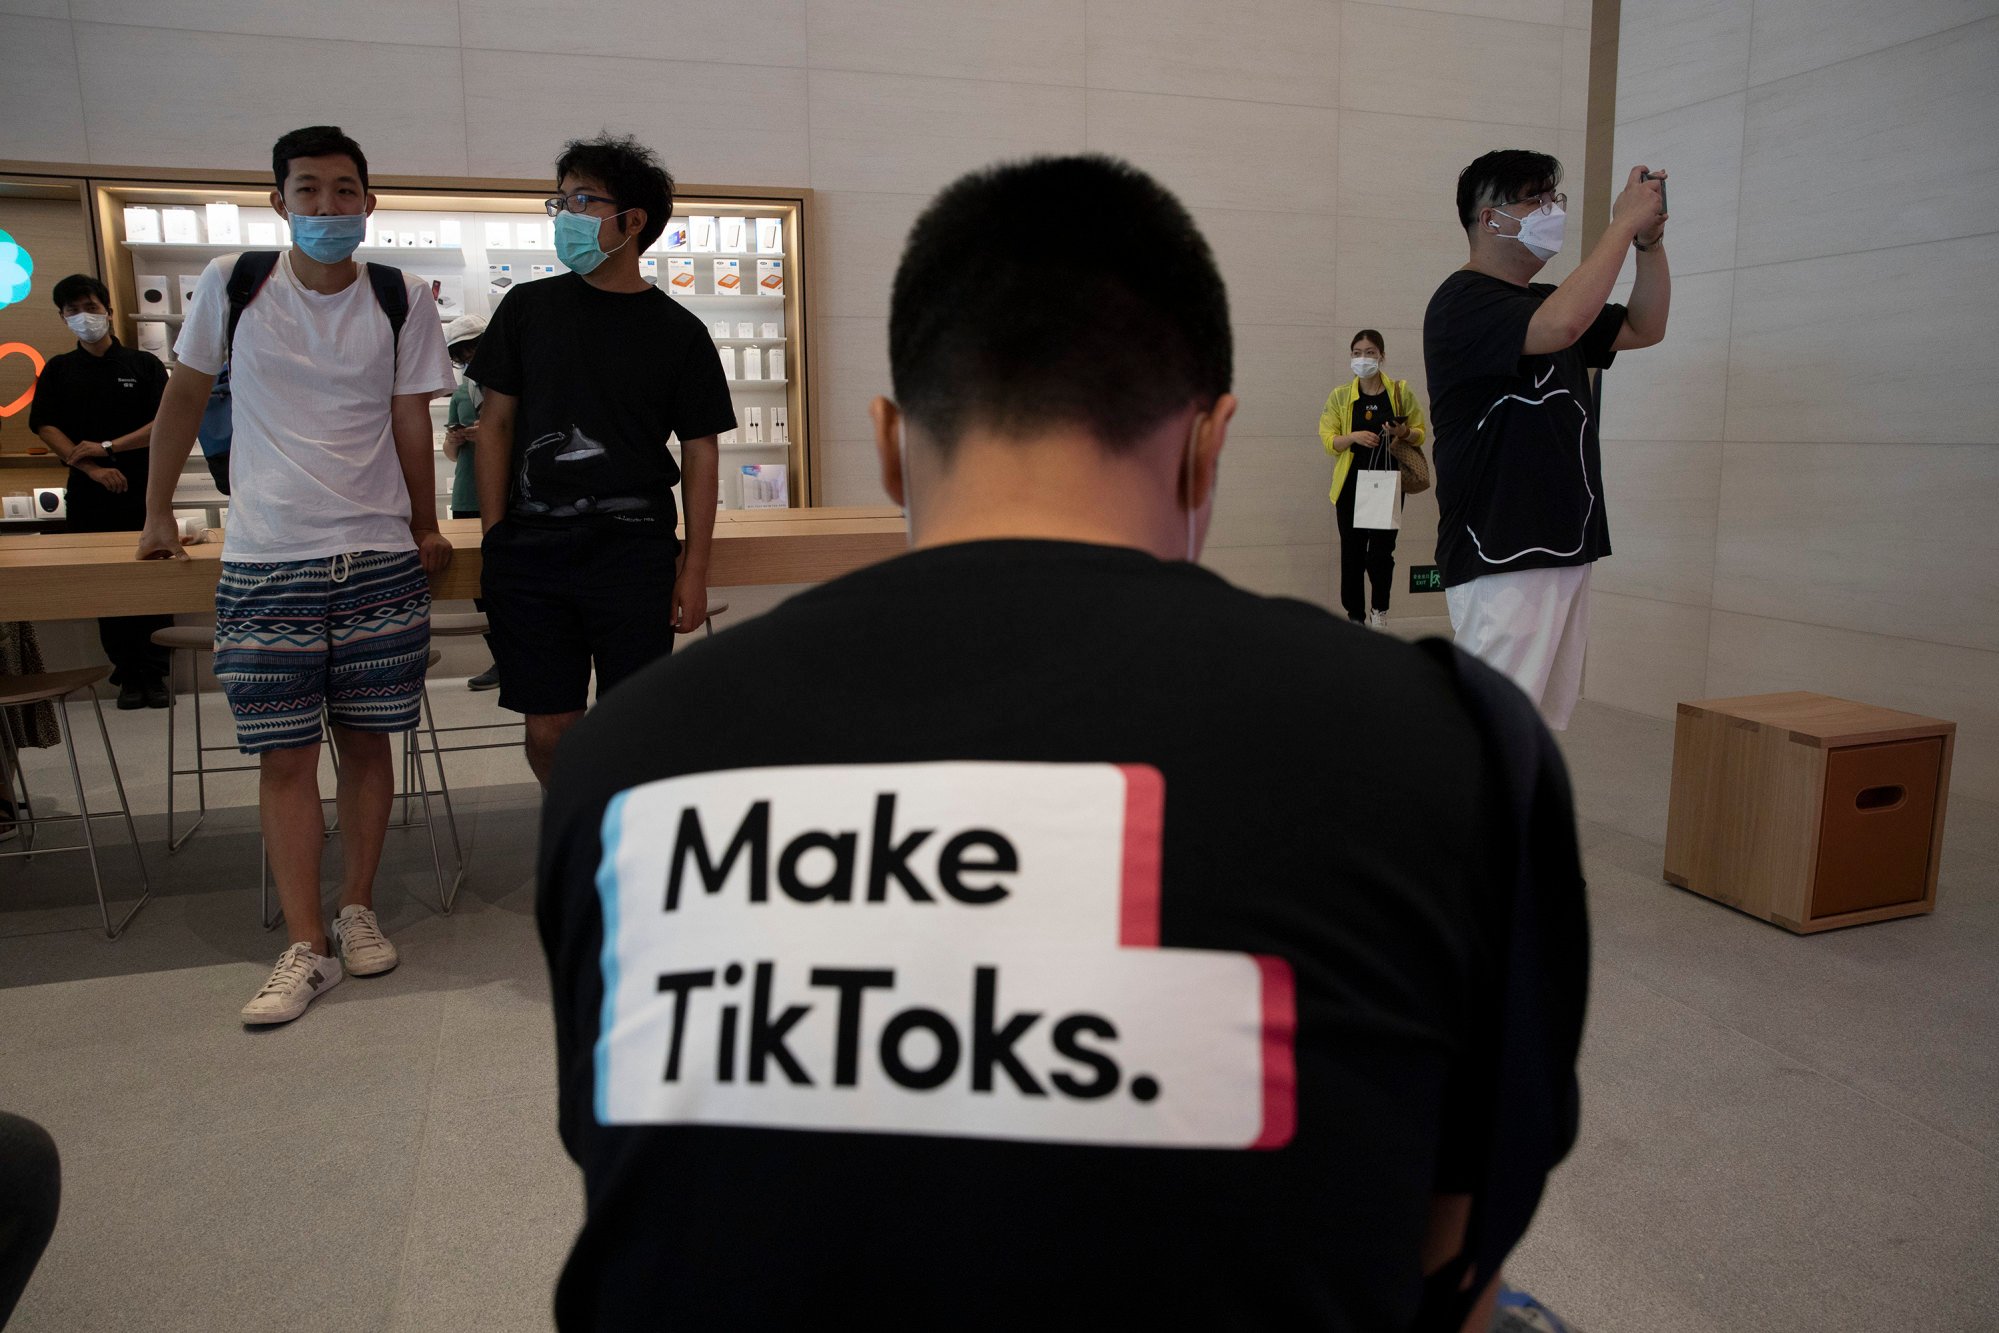 us sell-or-ban law against tiktok stirs unease in china as beijing, social media giant bytedance stay mum on next moves